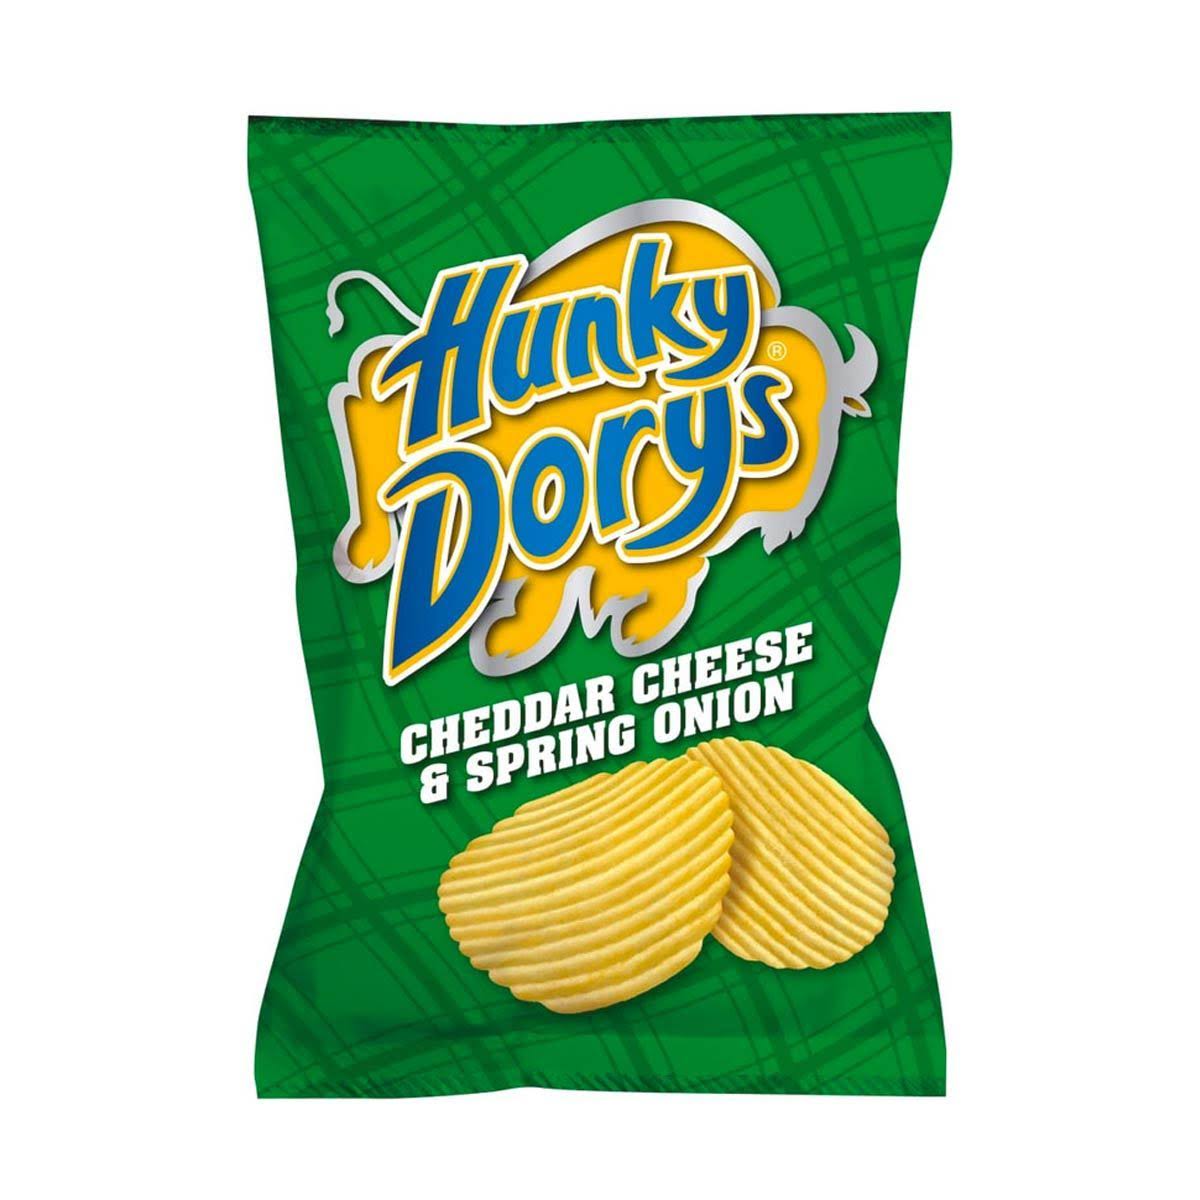 Hunky Dorys Cheddar Cheese and Spring Onion Potato Crisps, 1.6 oz/45 G